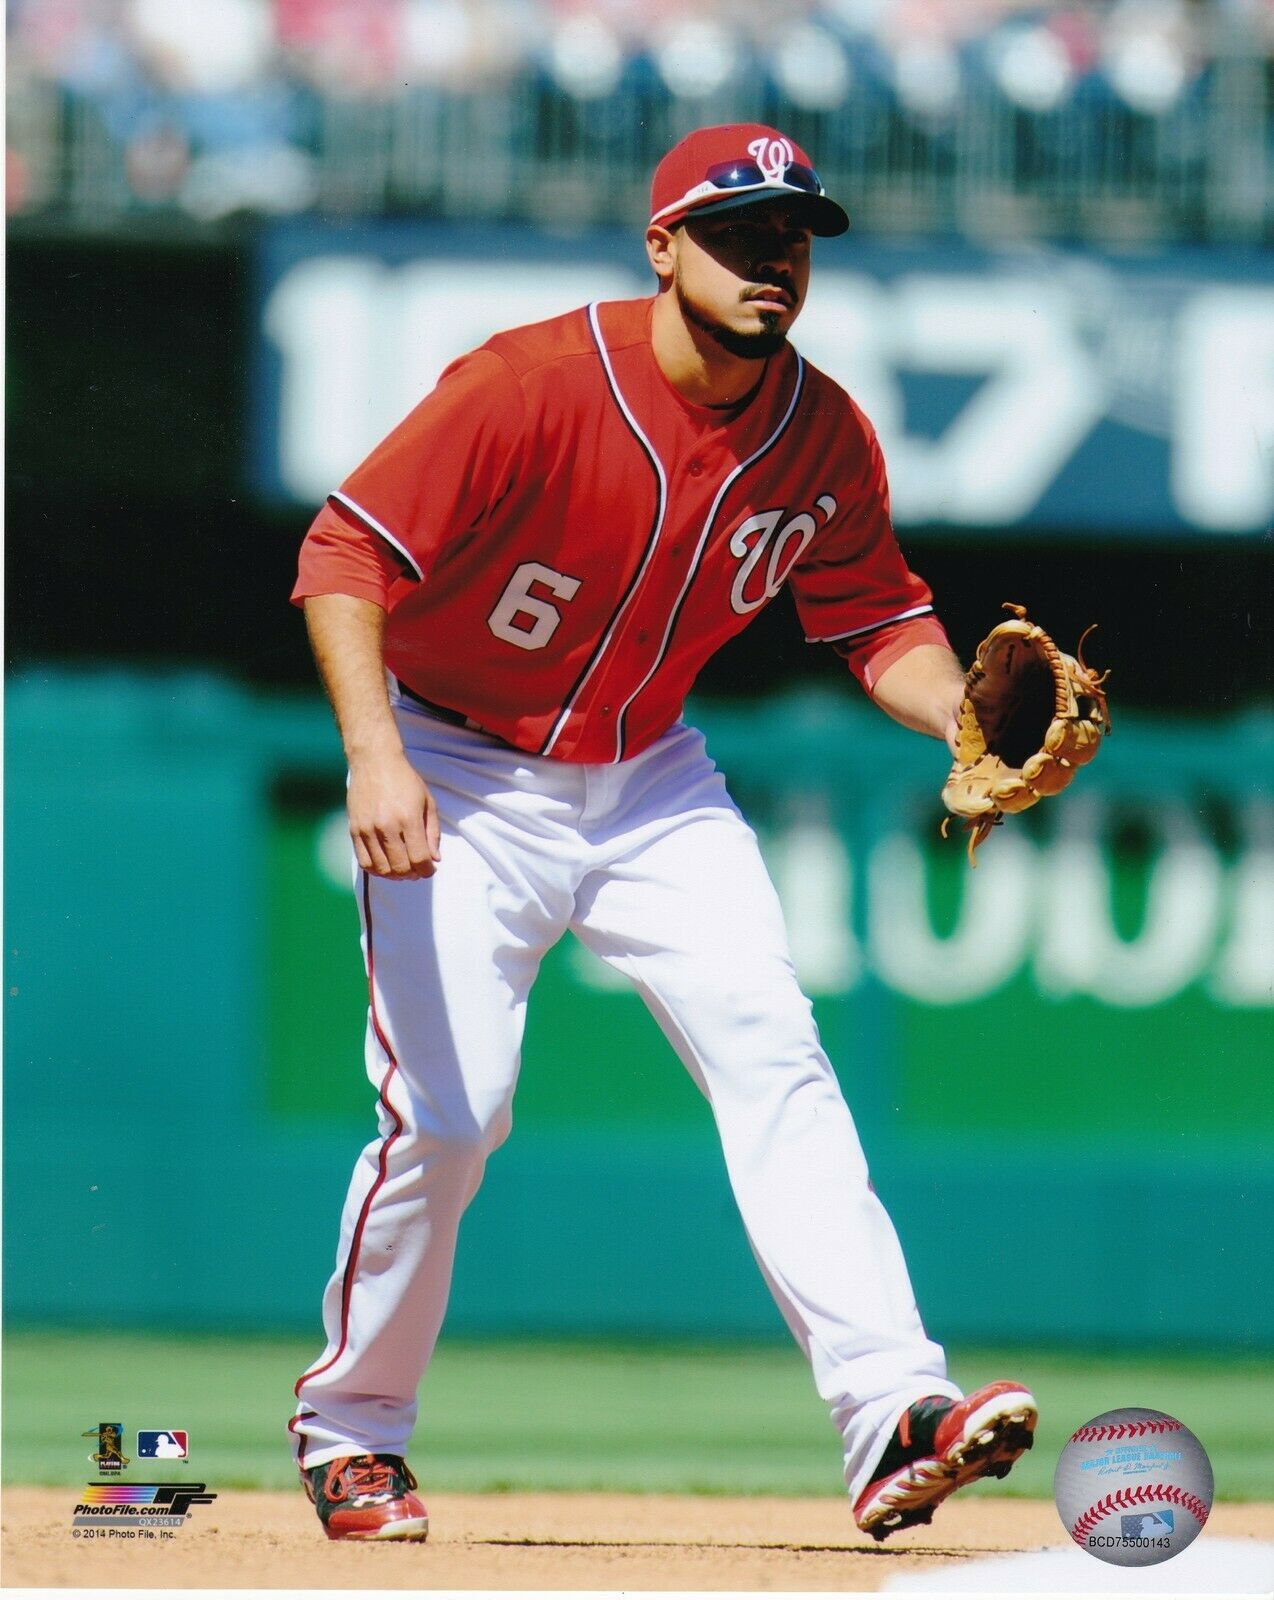 ANTHONY RENDON WASHINGTON NATIONALS Photo Poster paintingFILE LICENSED ACTION 8x10 Photo Poster painting